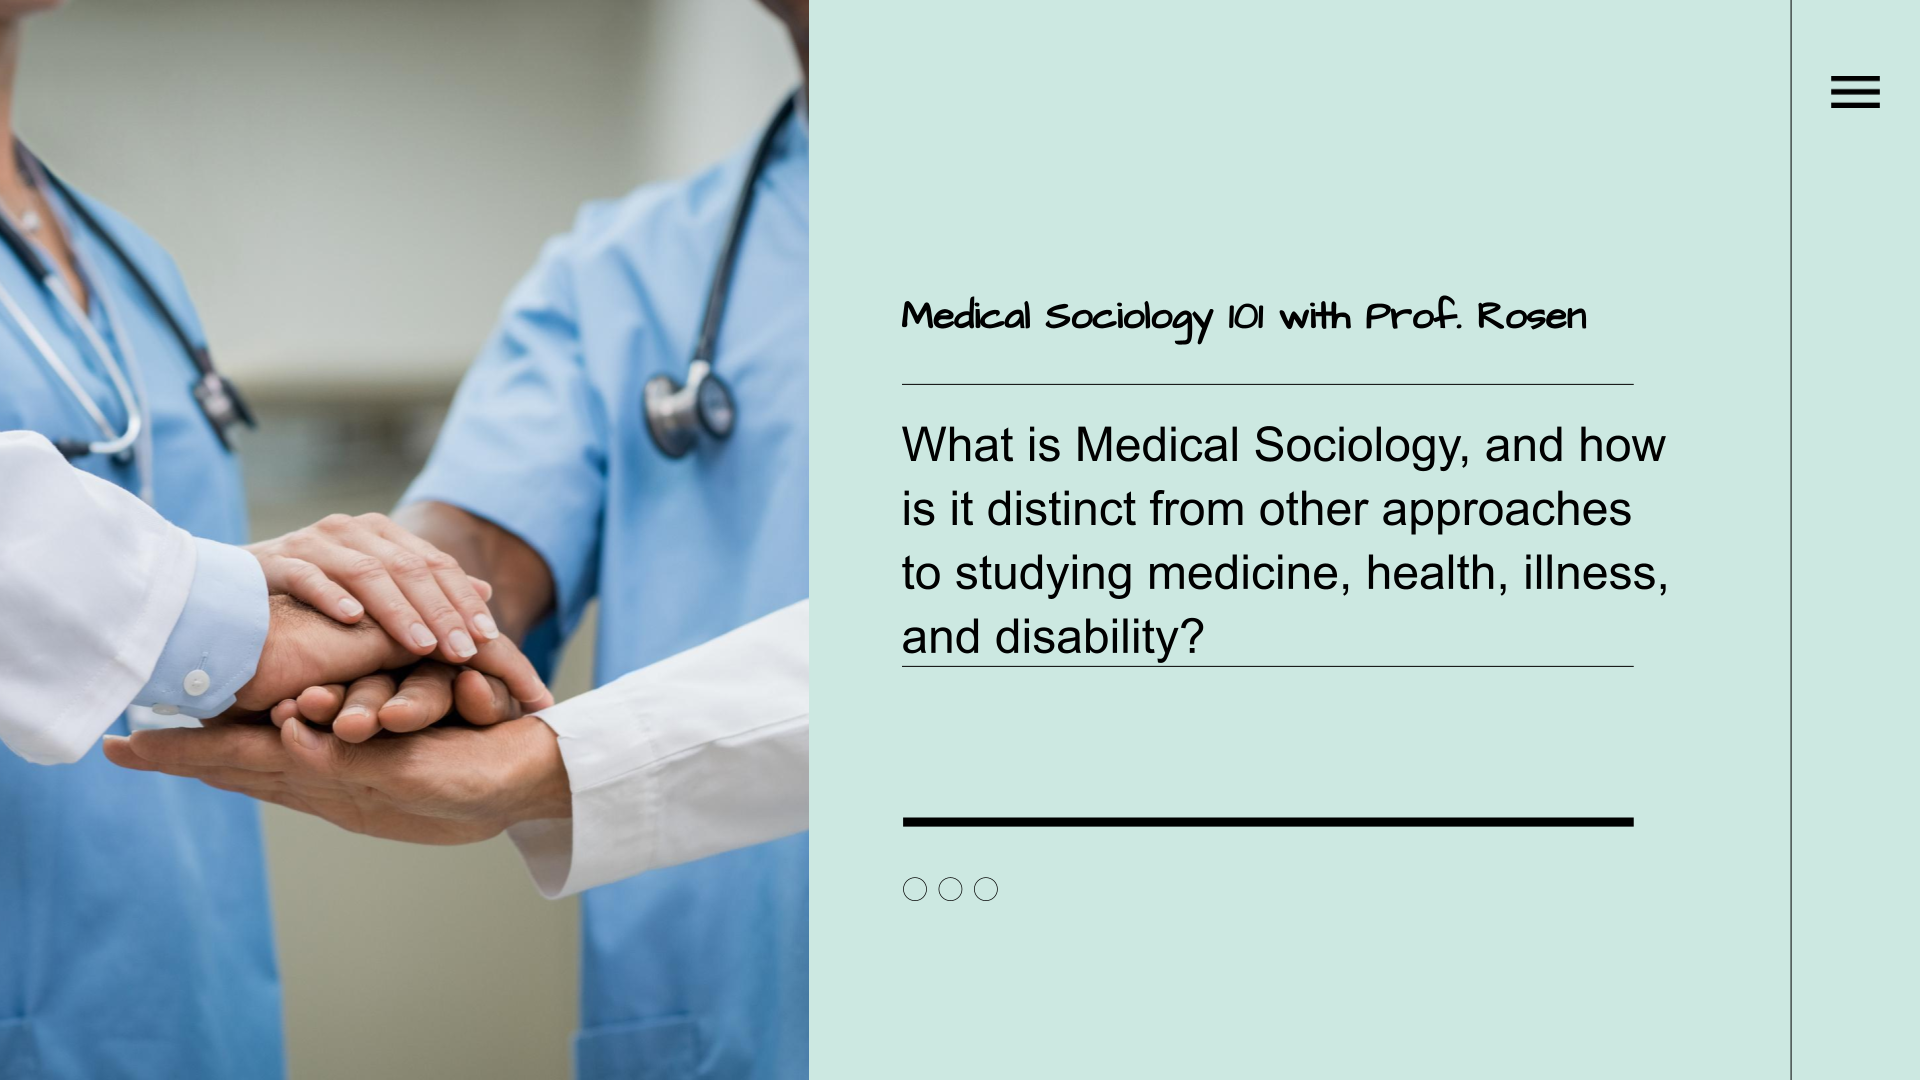 What is medical sociology, and how is it distinct from other approaches to studying medicine, health, illness, disability, and healthcare?